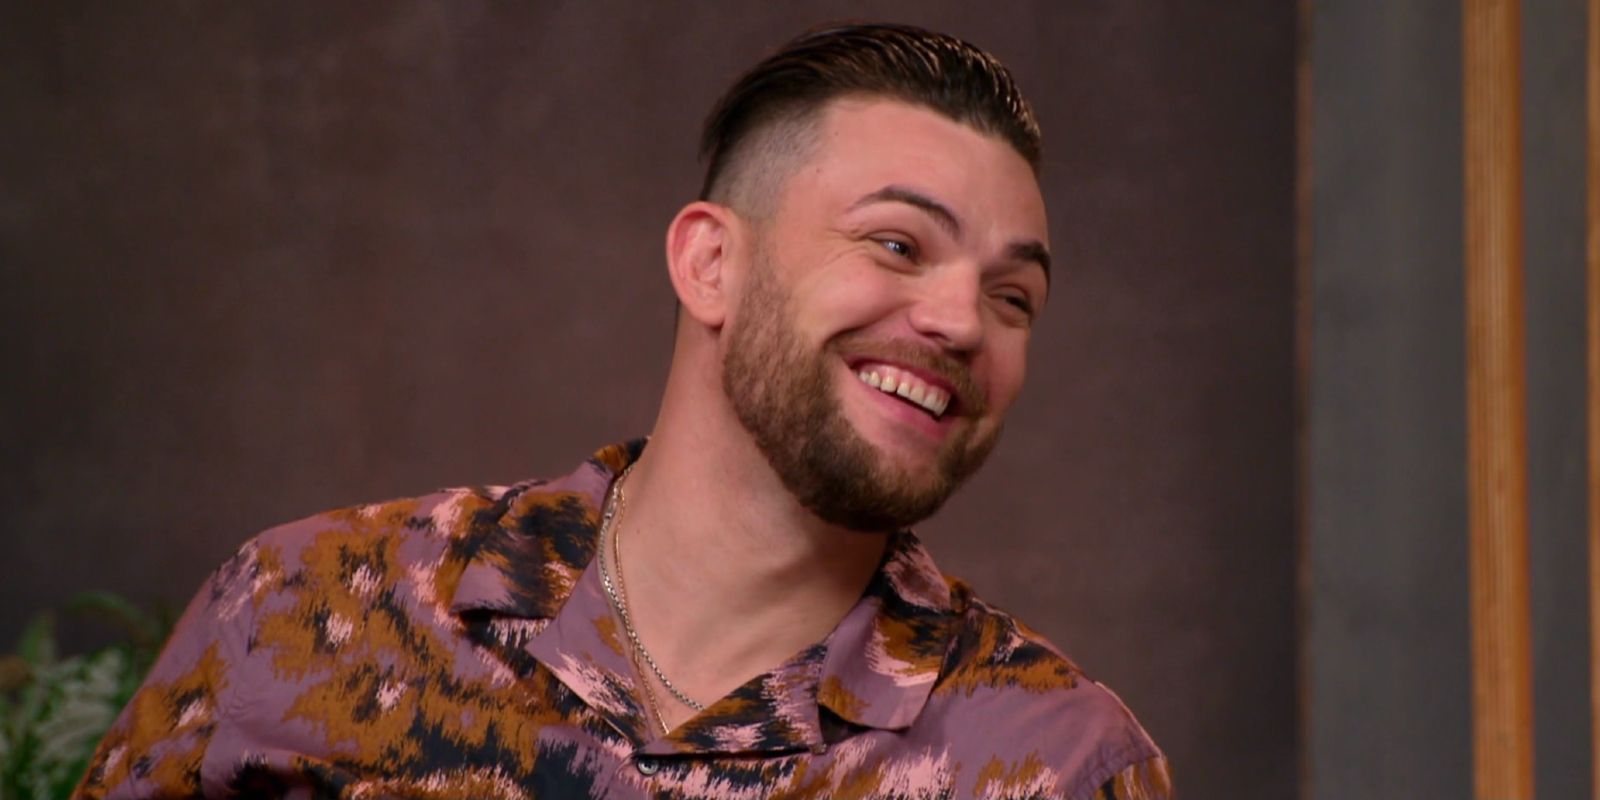 Andrei Castravet at the 90 Day Fiancé: Happily Ever After season 7 Tell All, smiling